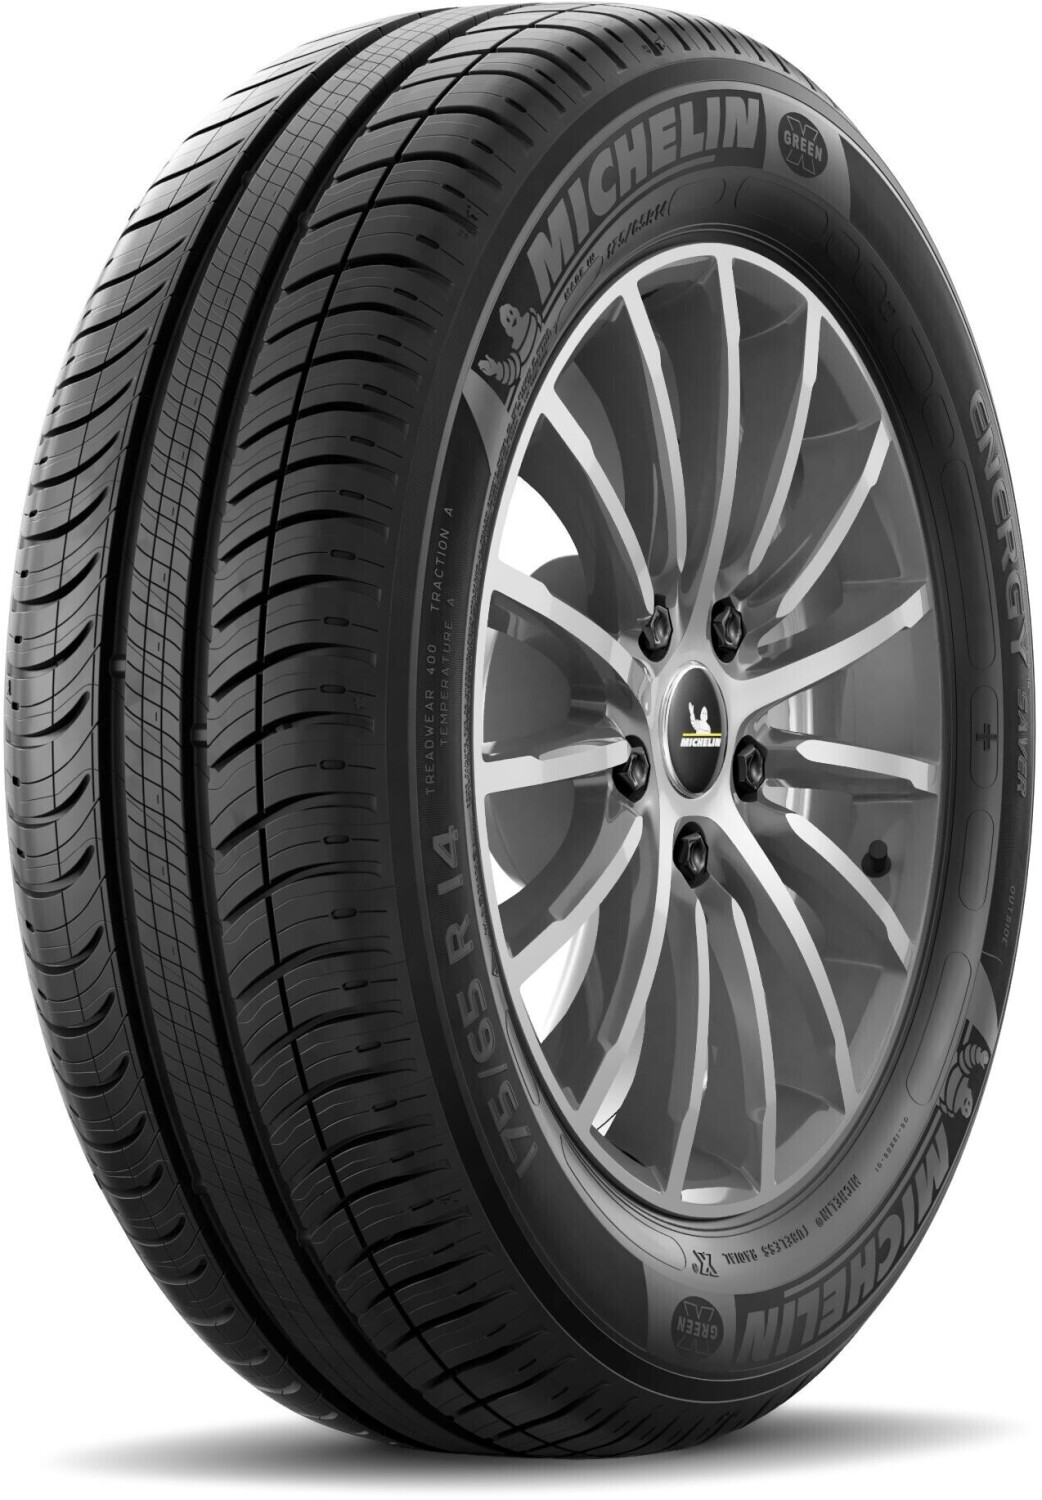 Buy Michelin Energy Saver + 175/65 R14 82T from £72.63 (Today) – Best Deals  on